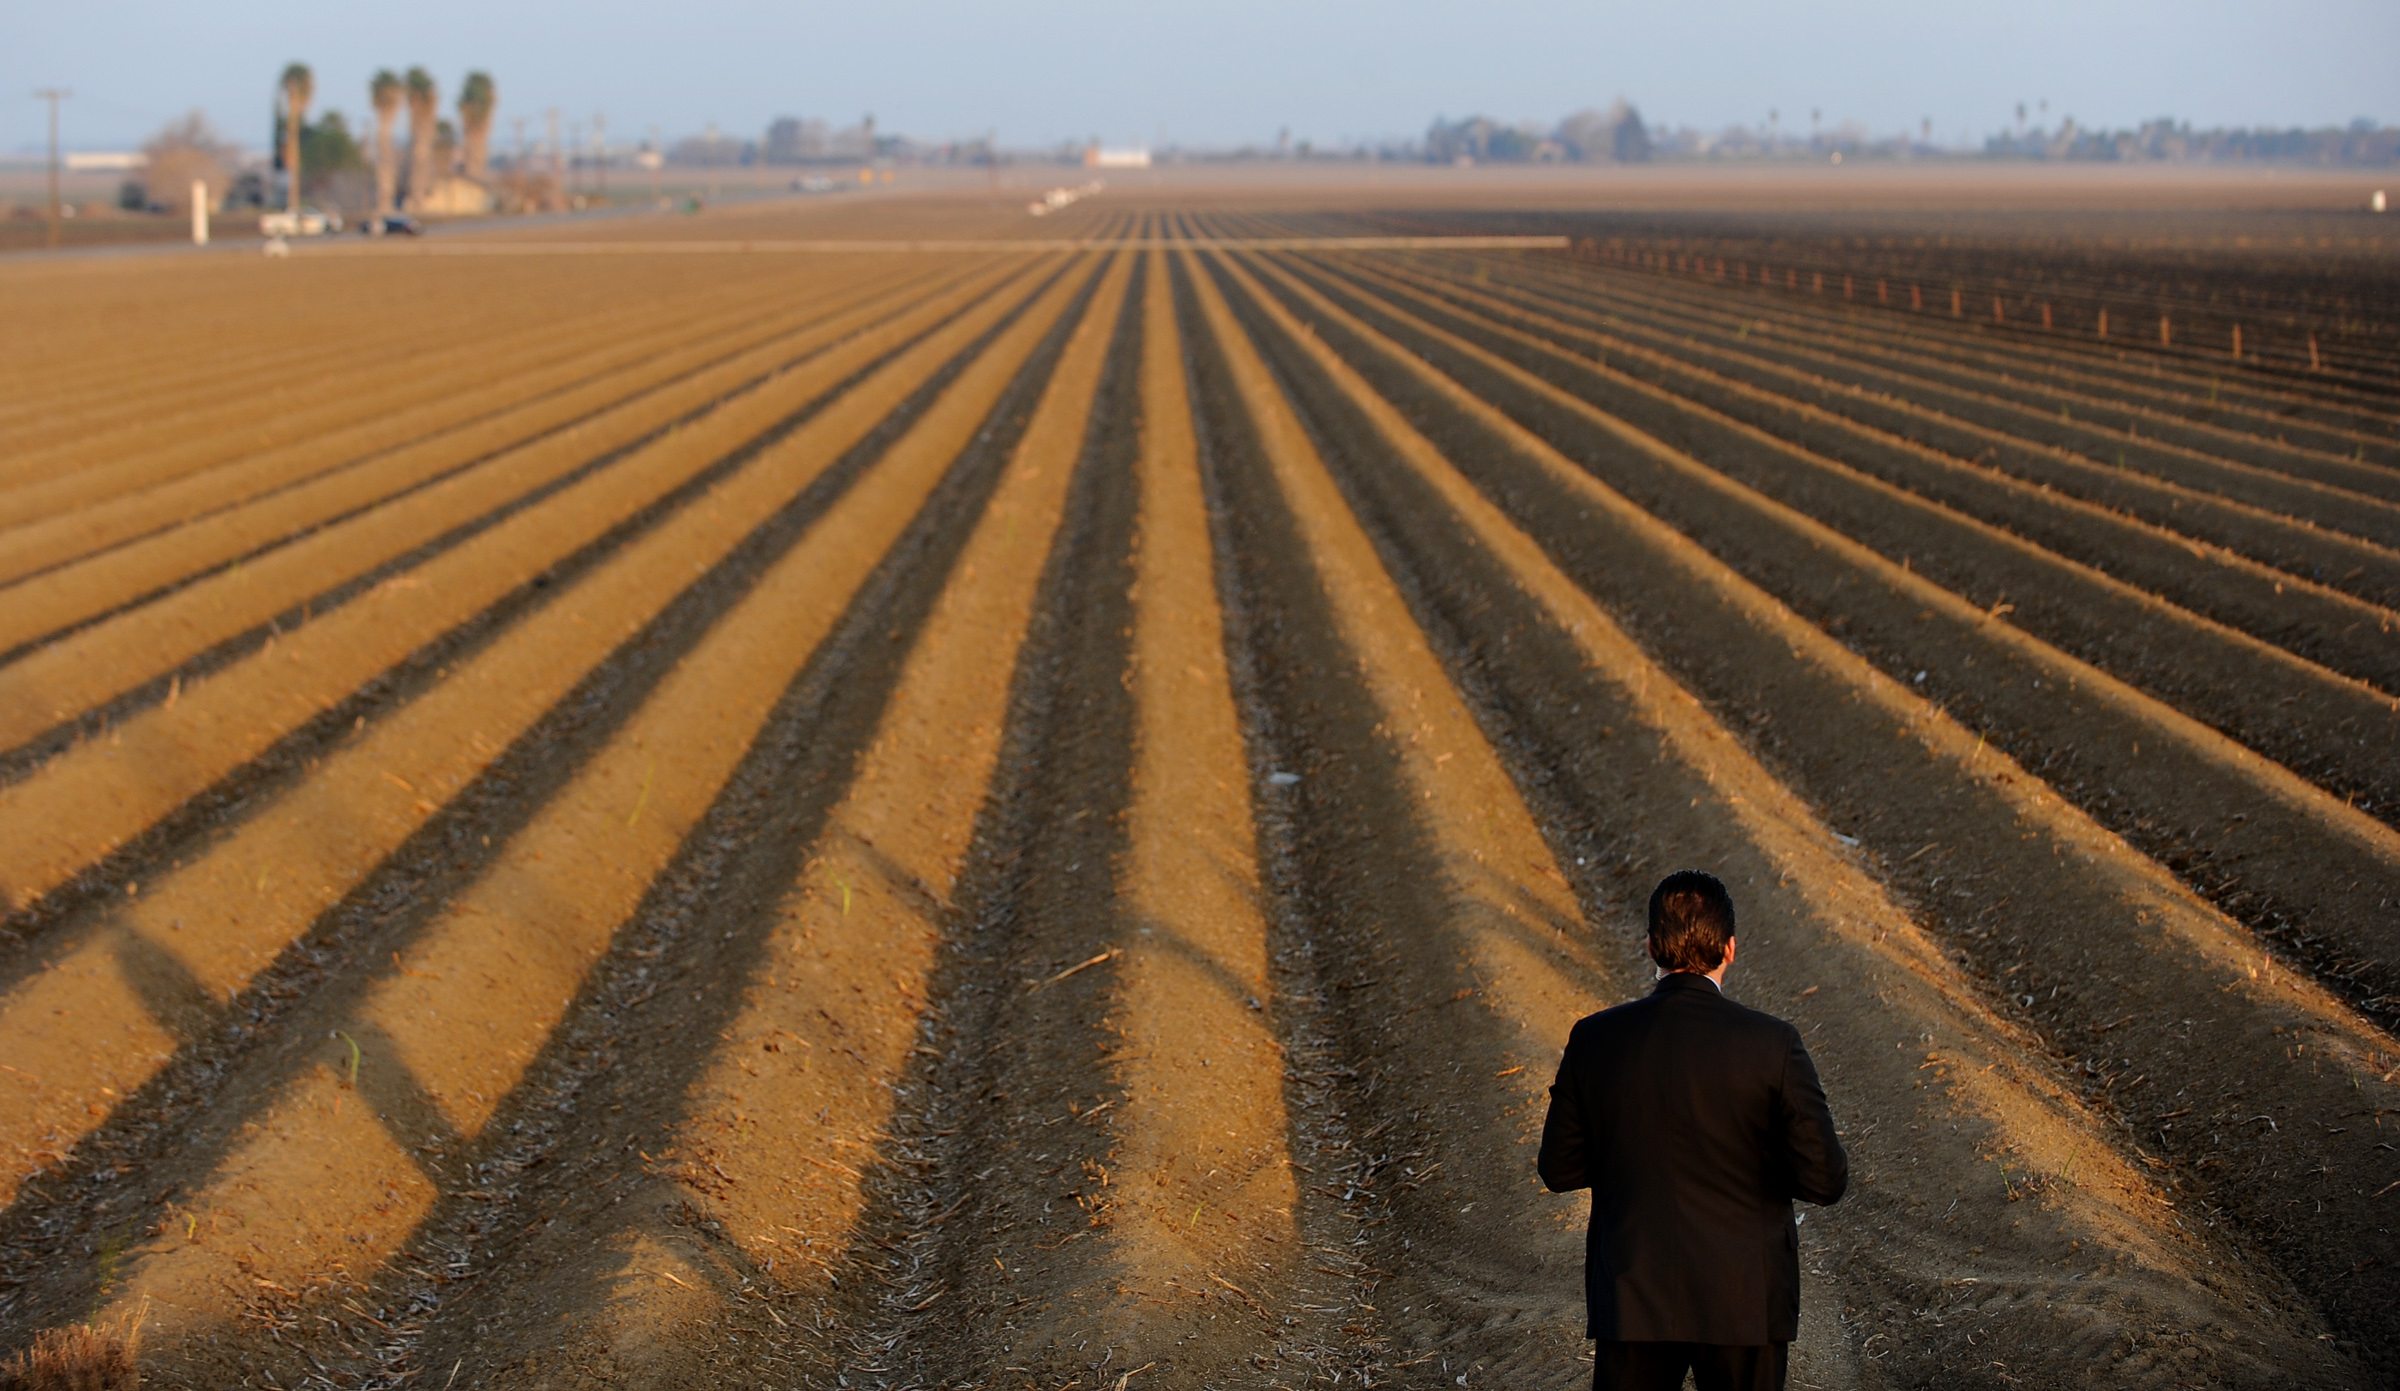 A secret service agent looks over a fallowed field near the Fresno County town of Firebaugh, during a February 2014 visit by President Obama to announce emergency drought relief measures.